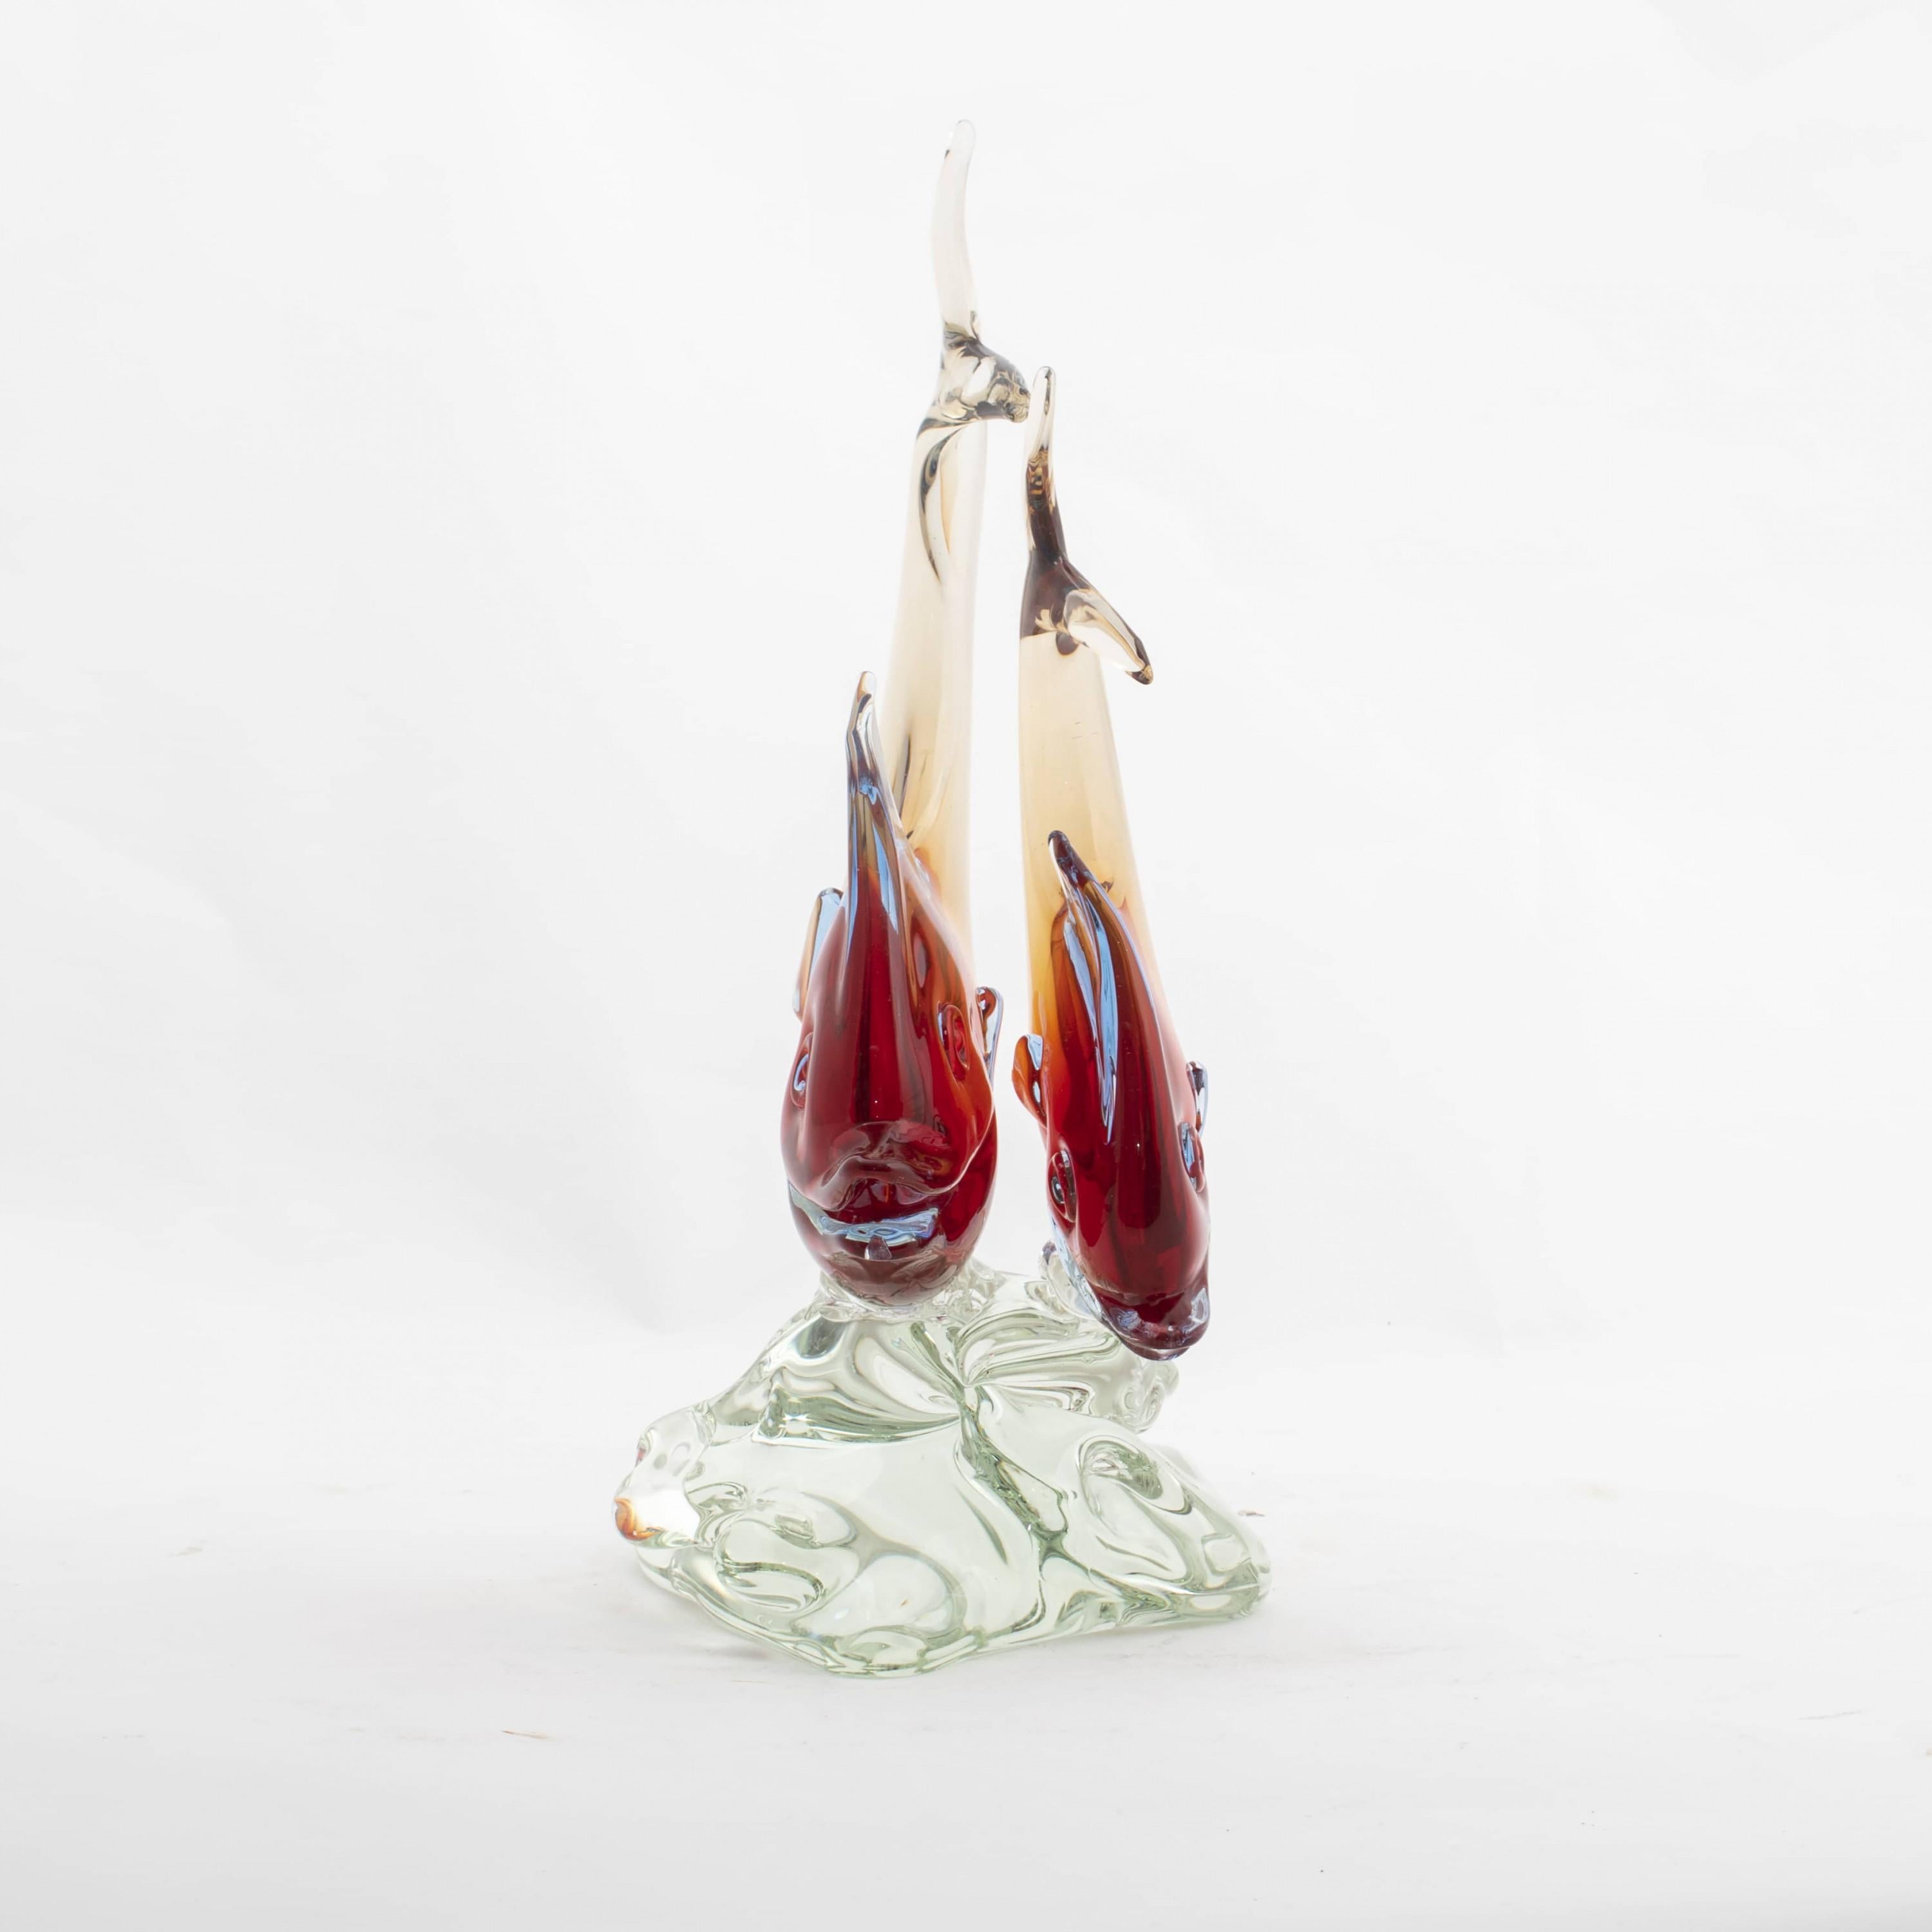 Large and elegant Murano glass art sculpture representing two fish perched on molded base.
This beautiful hand blown glass sculpture is made of translucent glass infused with color. Handcrafted by master Licio Zanetti, at the prestigious glassworks